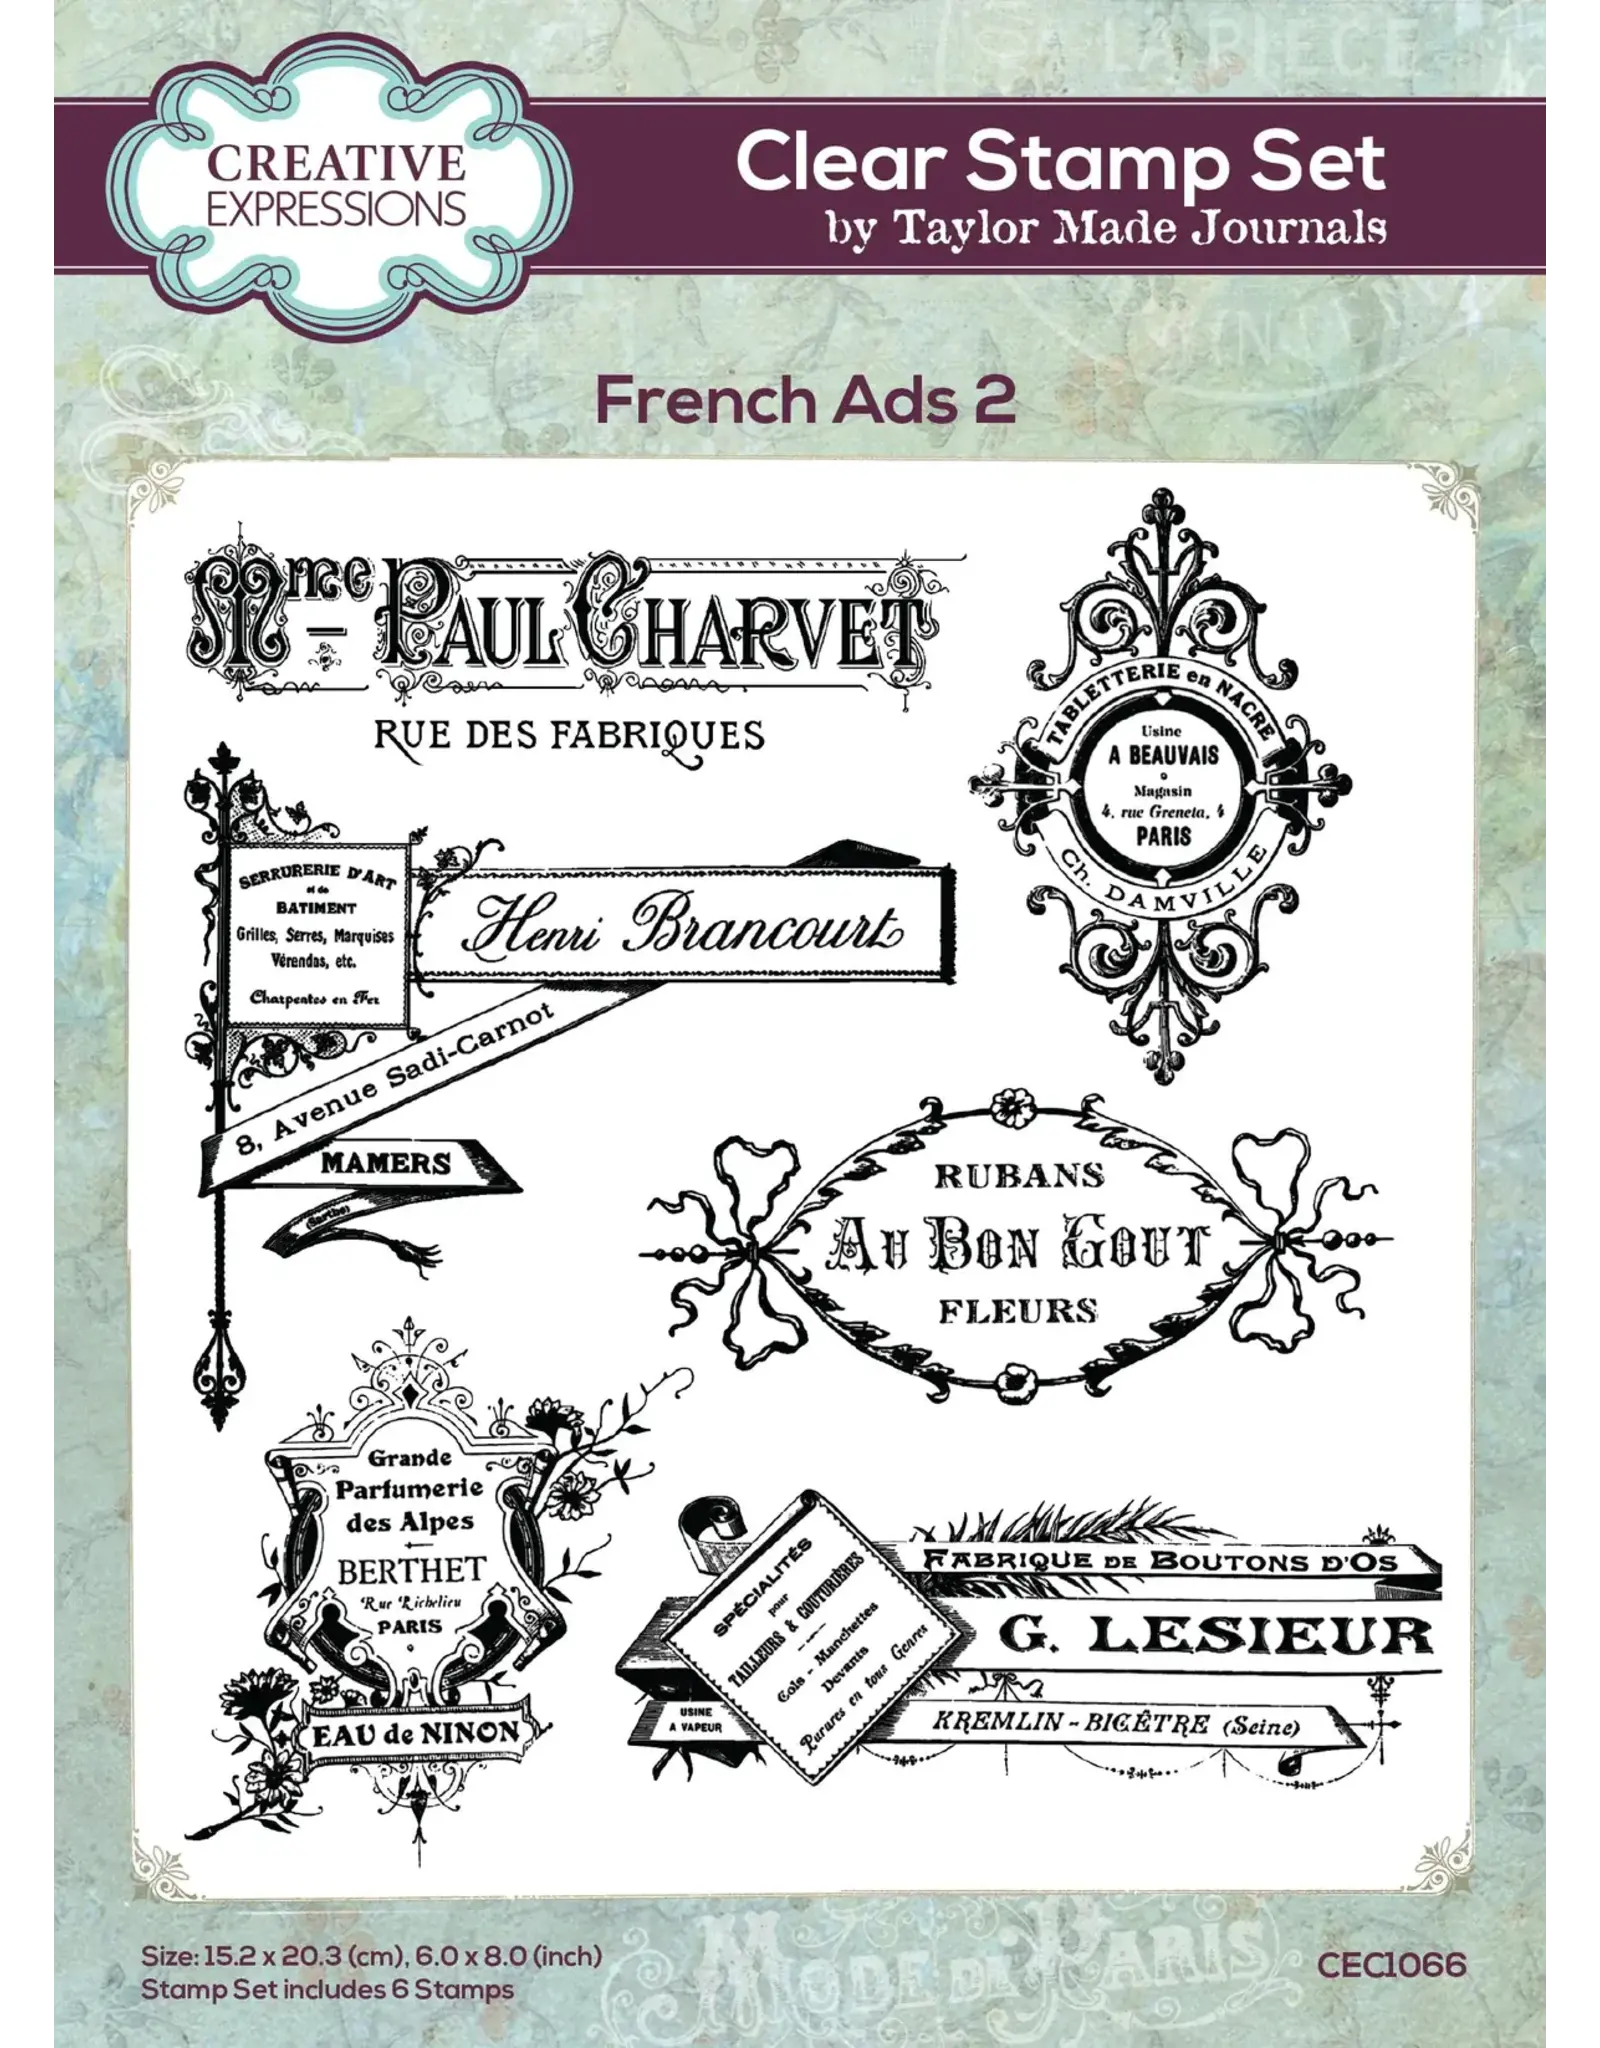 CREATIVE EXPRESSIONS CREATIVE EXPRESSIONS TAYLOR MADE JOURNALS FRENCH ADS 2 6x8 CLEAR STAMP SET